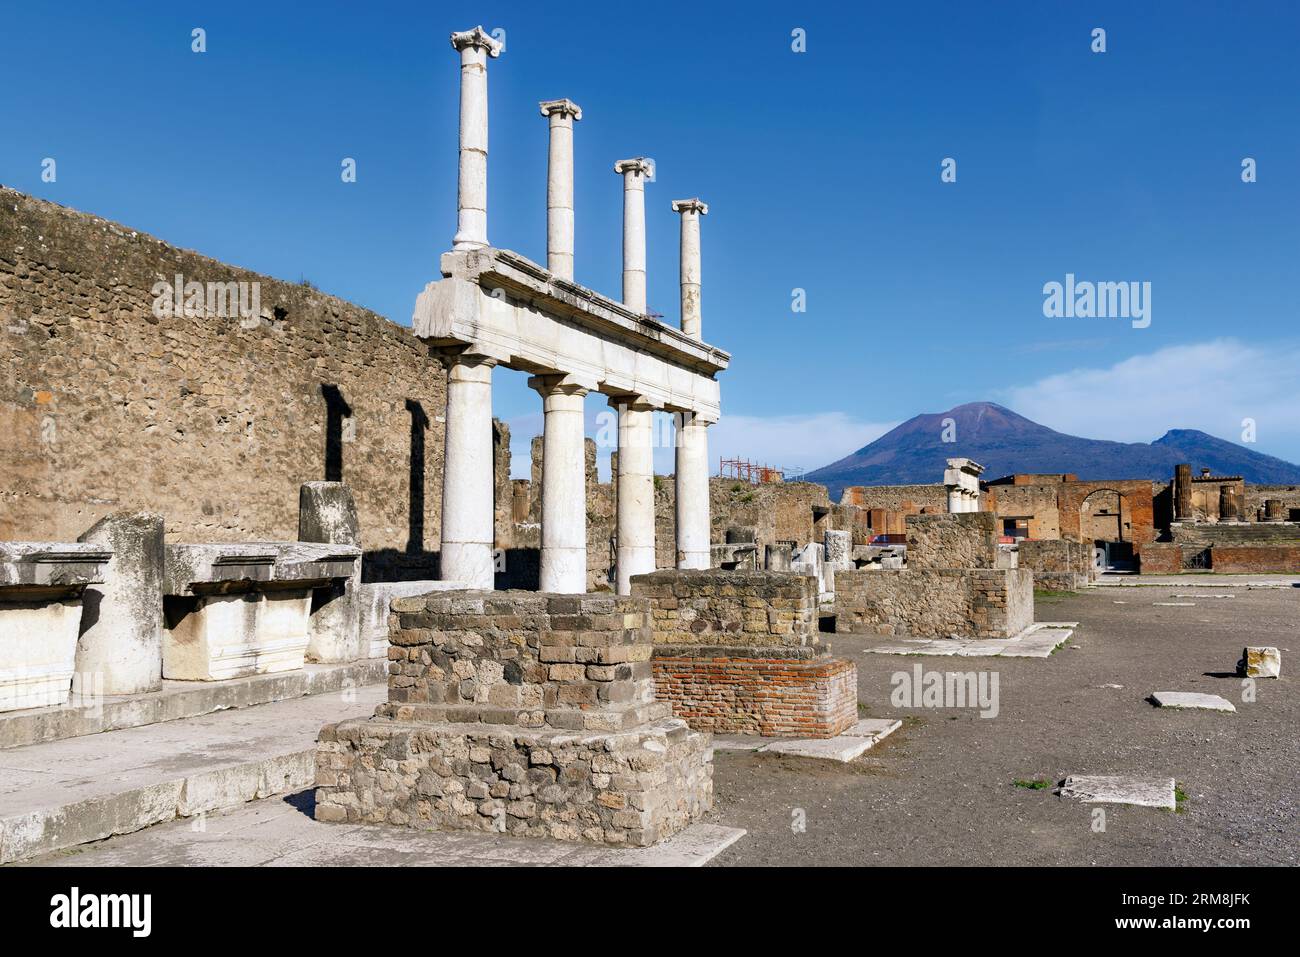 Pompeii Archaeological Site, Campania, Italy.  The Forum.  Pompeii, Herculaneum, and Torre Annunziata are collectively designated a UNESCO World Herit Stock Photo